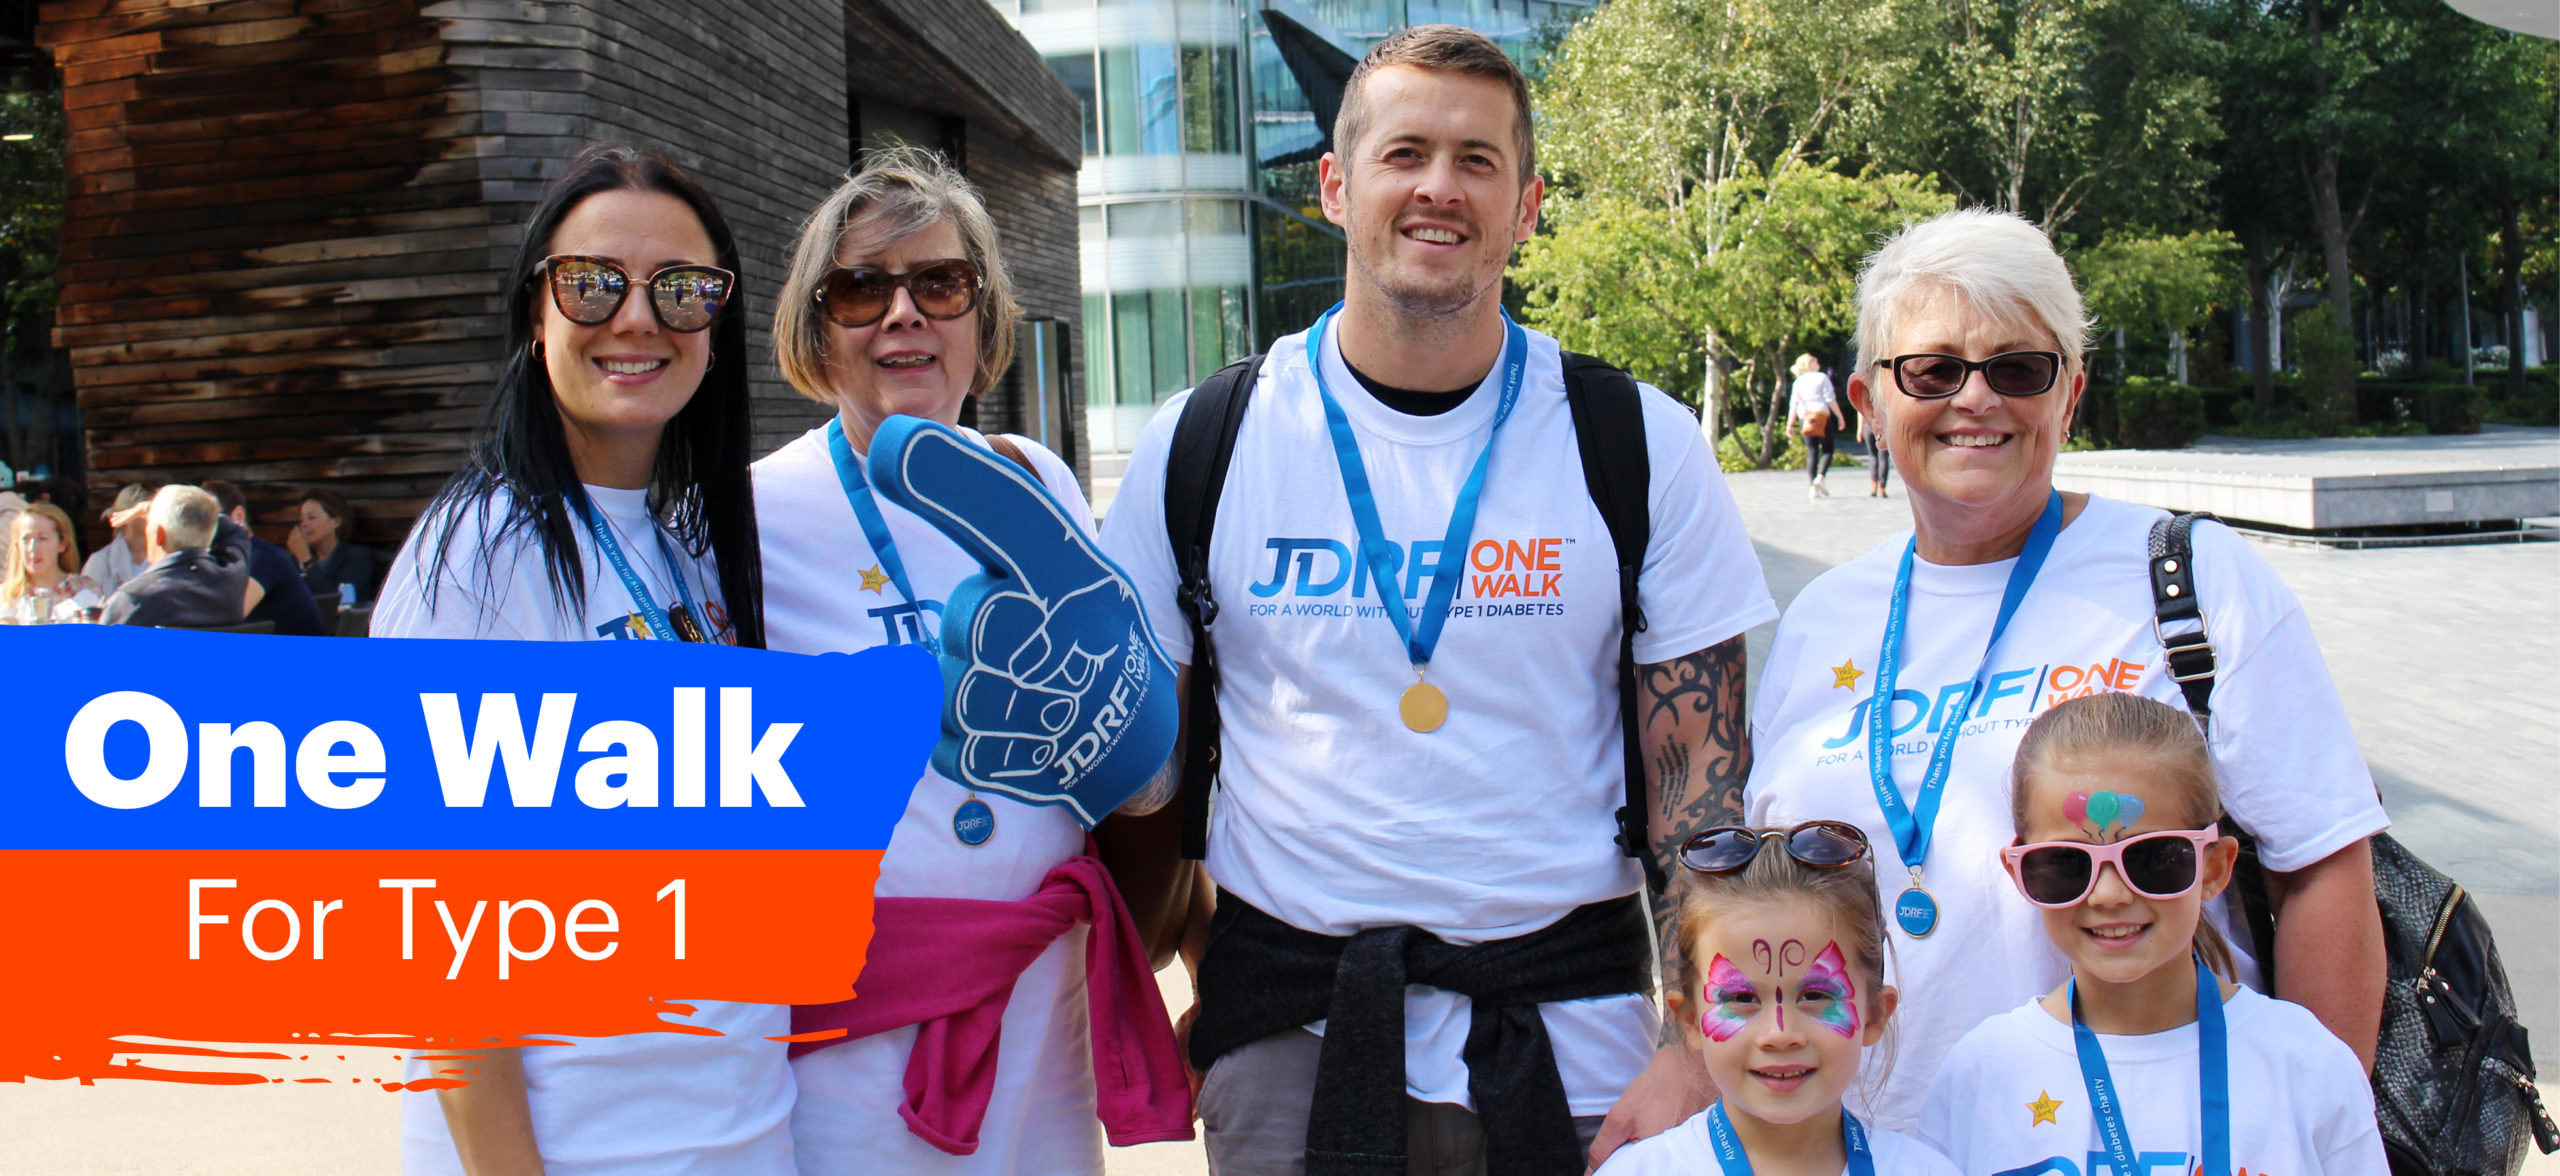 JDRF's One Walk is back!